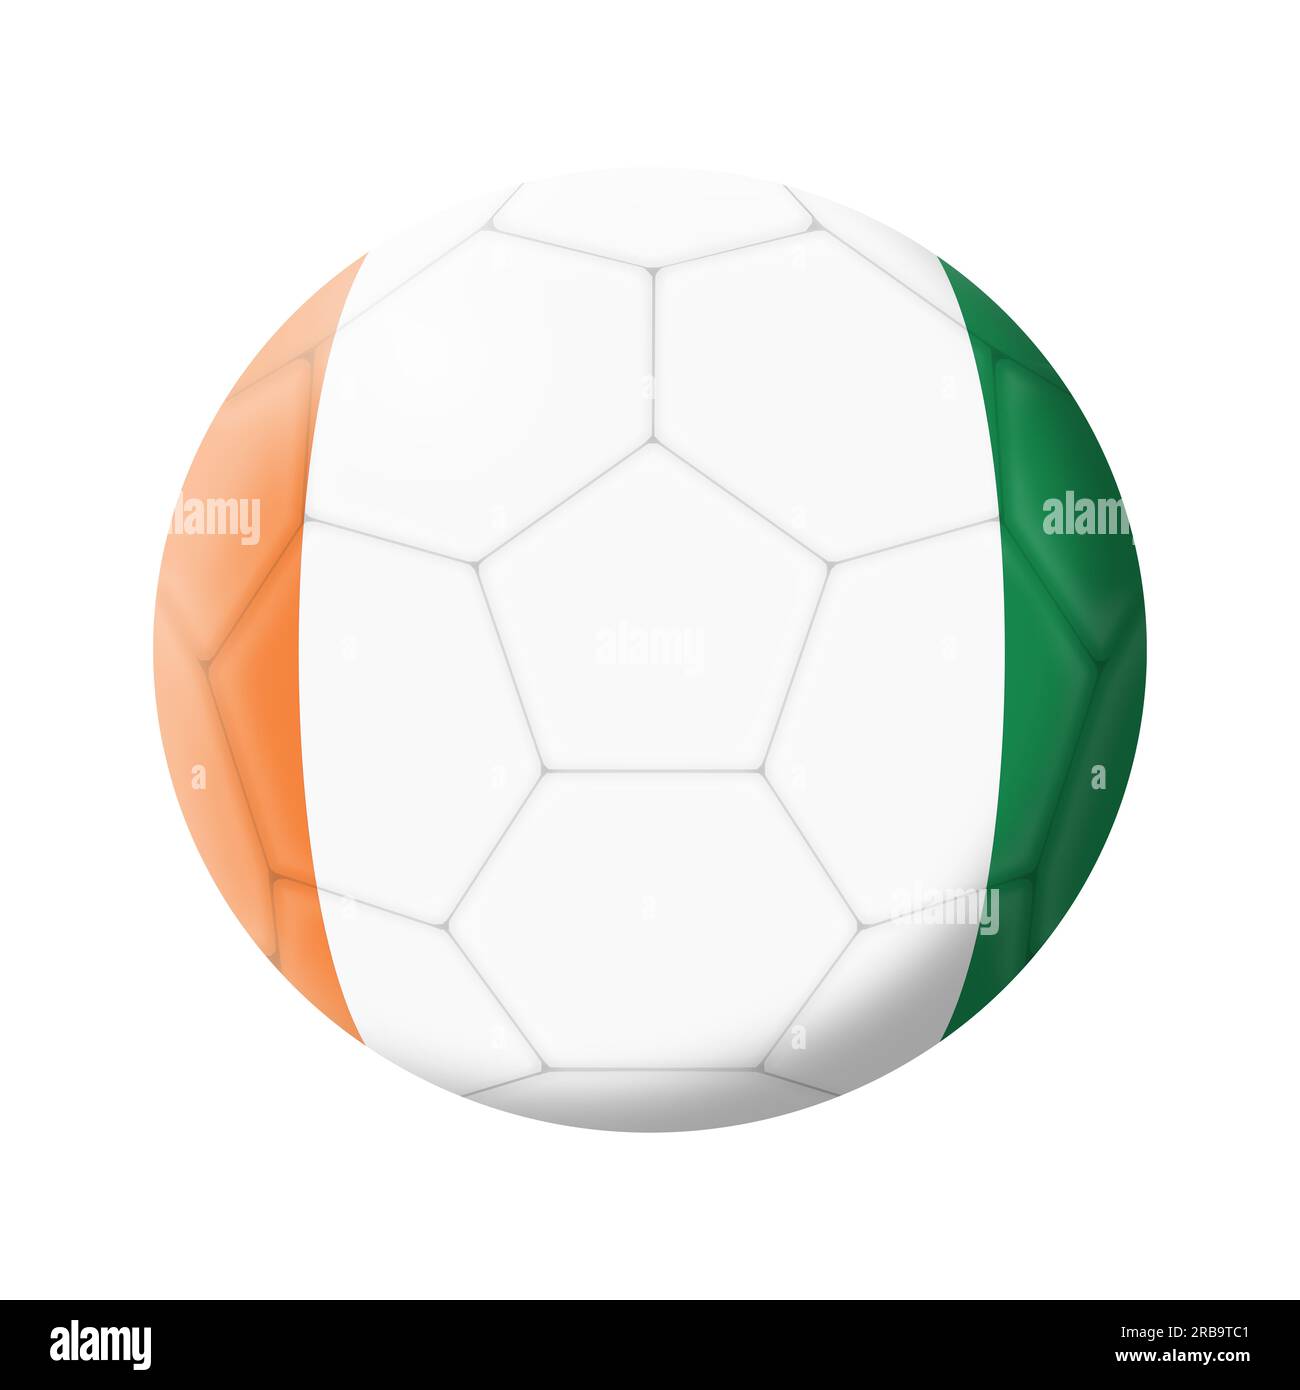 Ivory Coast Cote dIvoire soccer ball football 3d illustration with clipping path Stock Photo